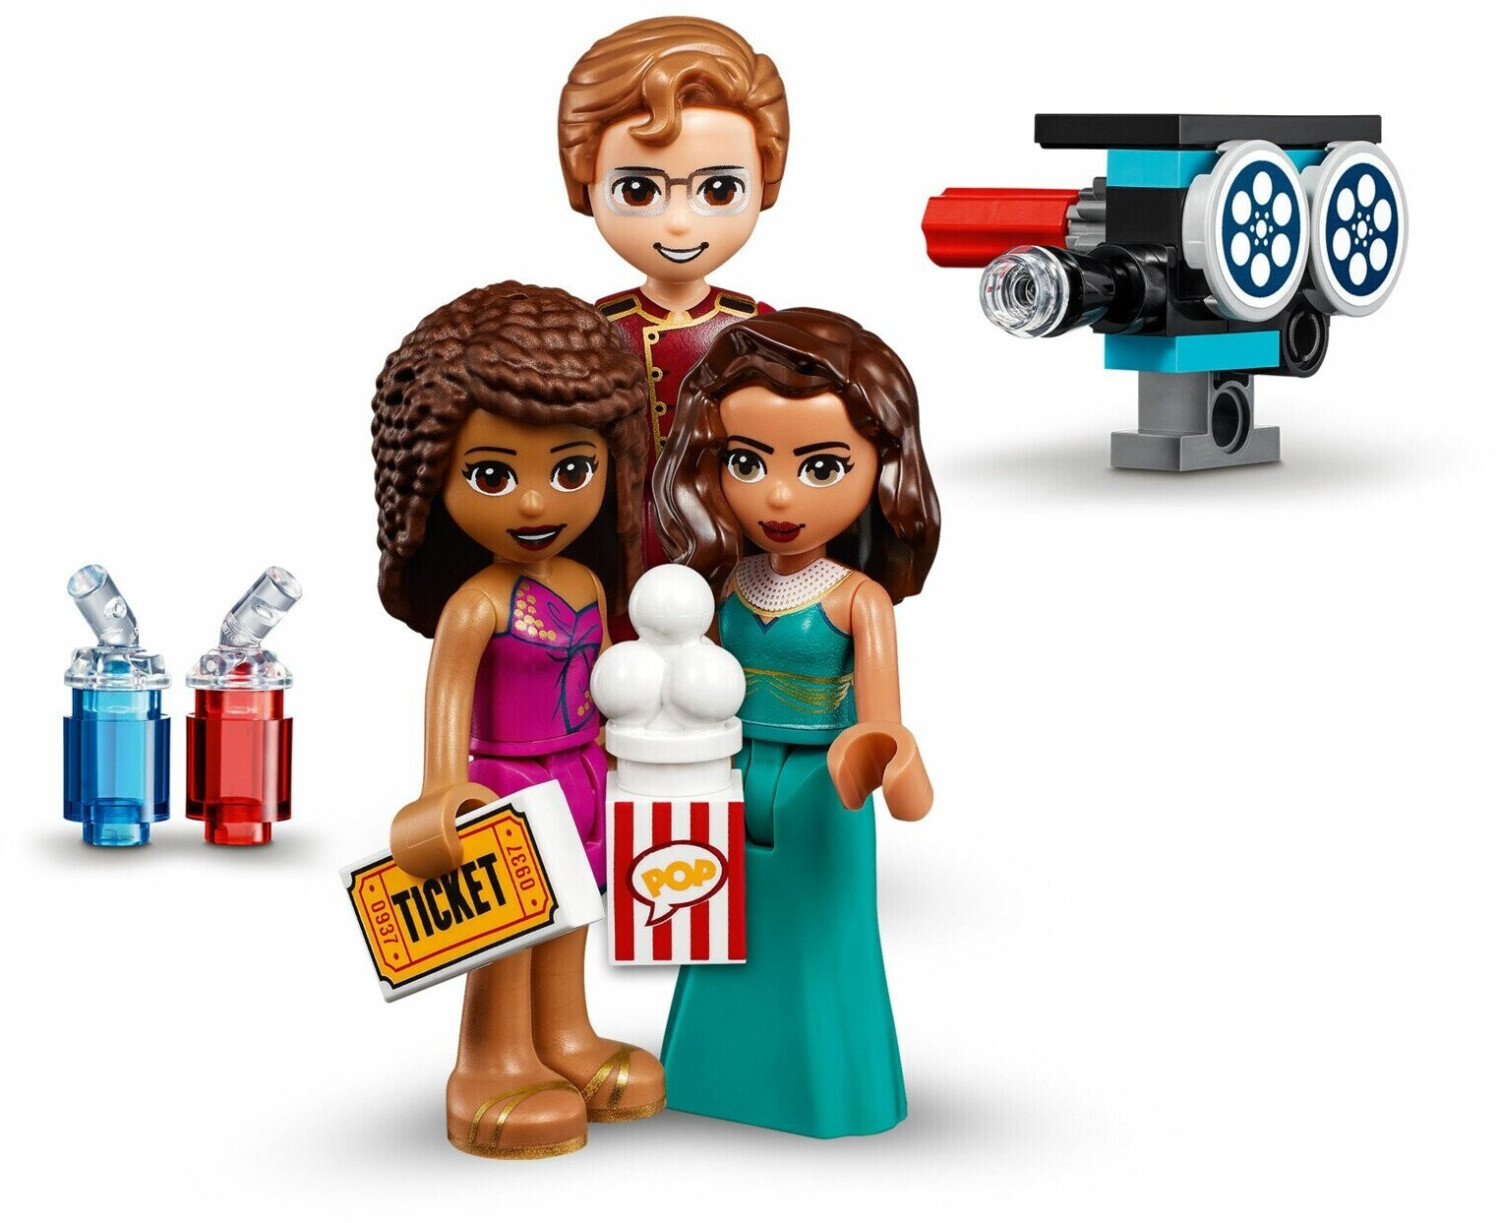 Buy LEGO Friends - Heartlake £24.23 (41448) (Today) Best – Deals City on Cinema from